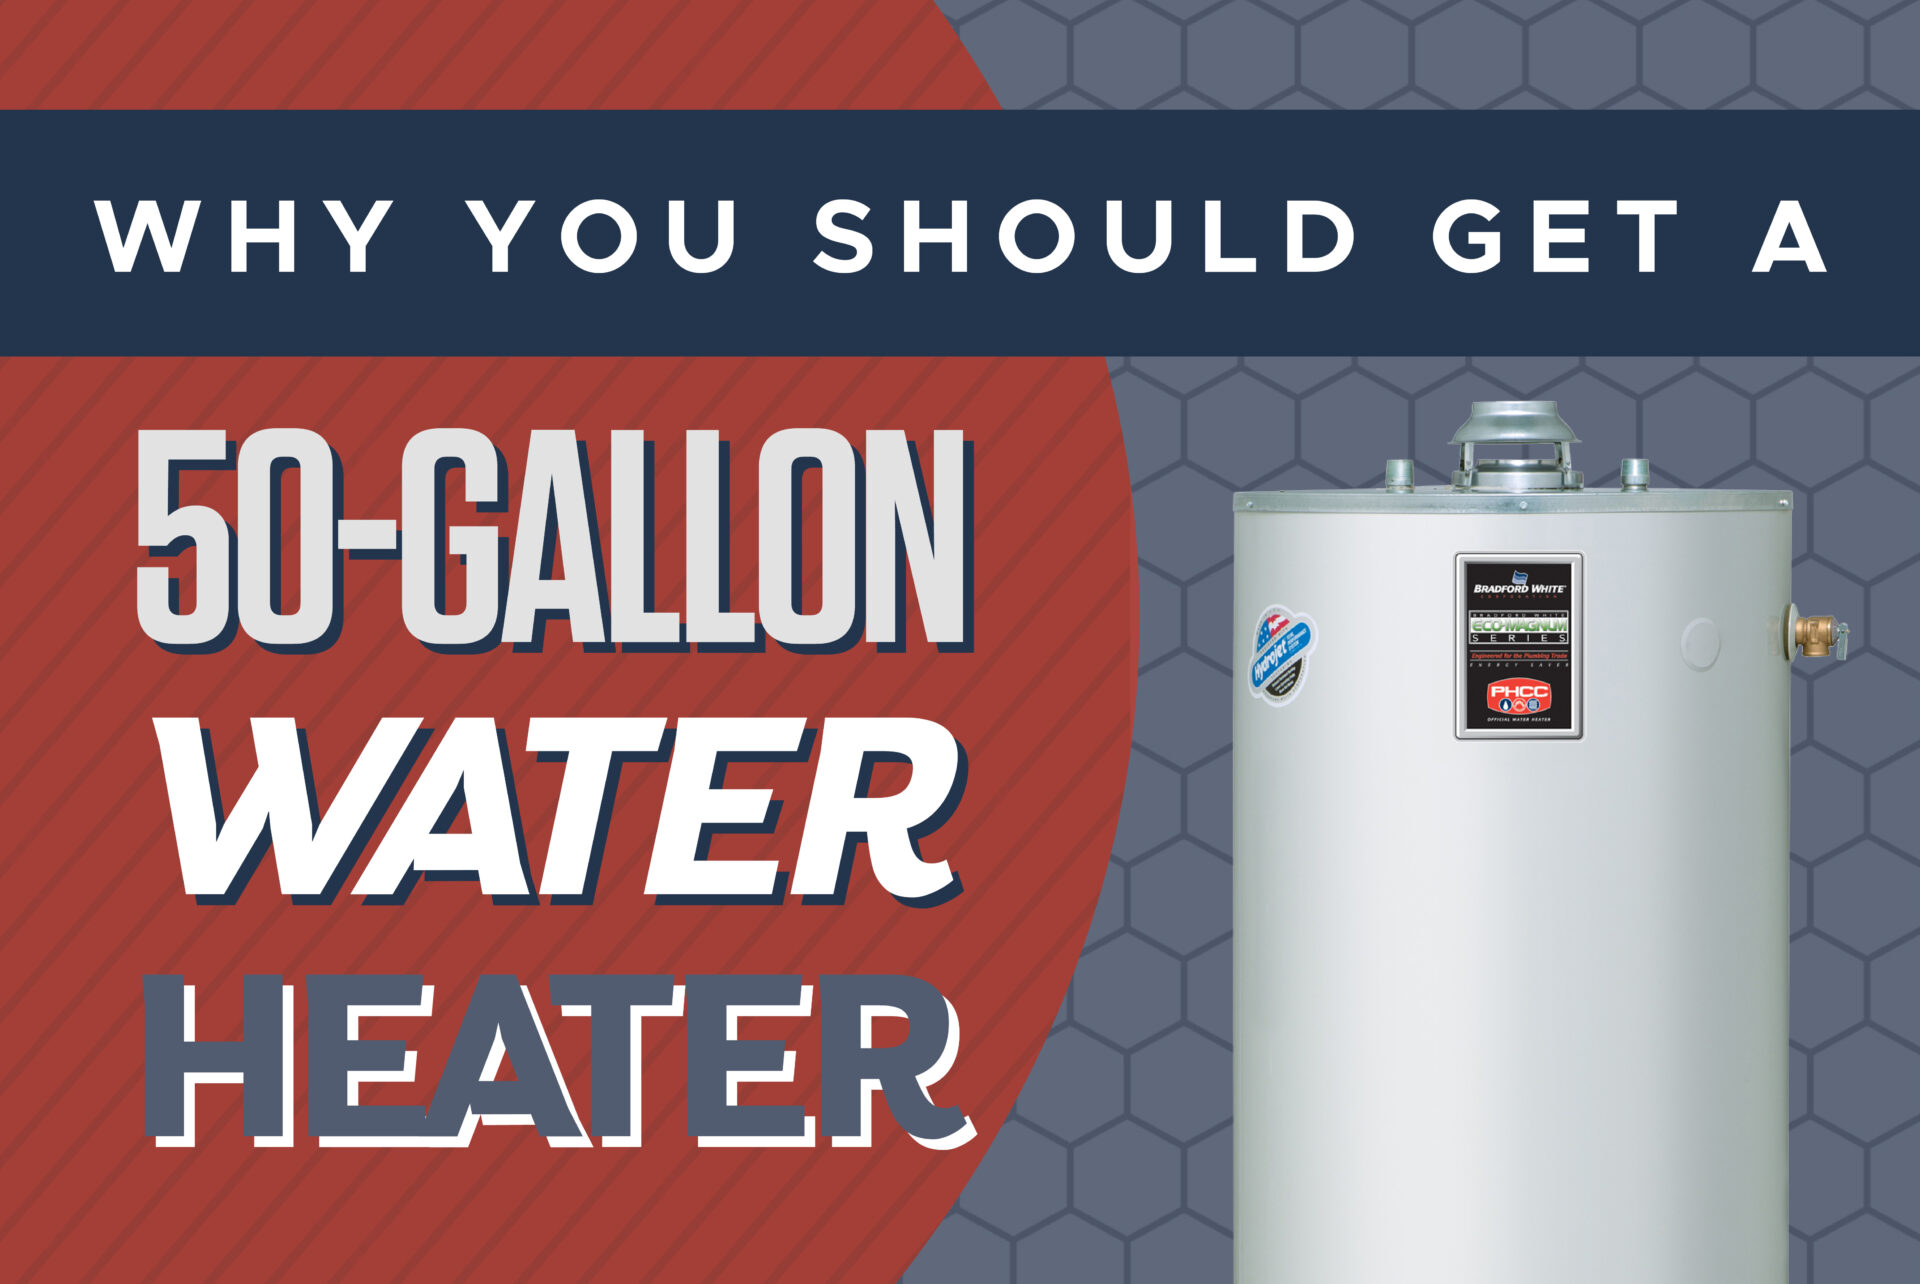 4 Reasons Why You Should Get a 50 Gallon Water Heater